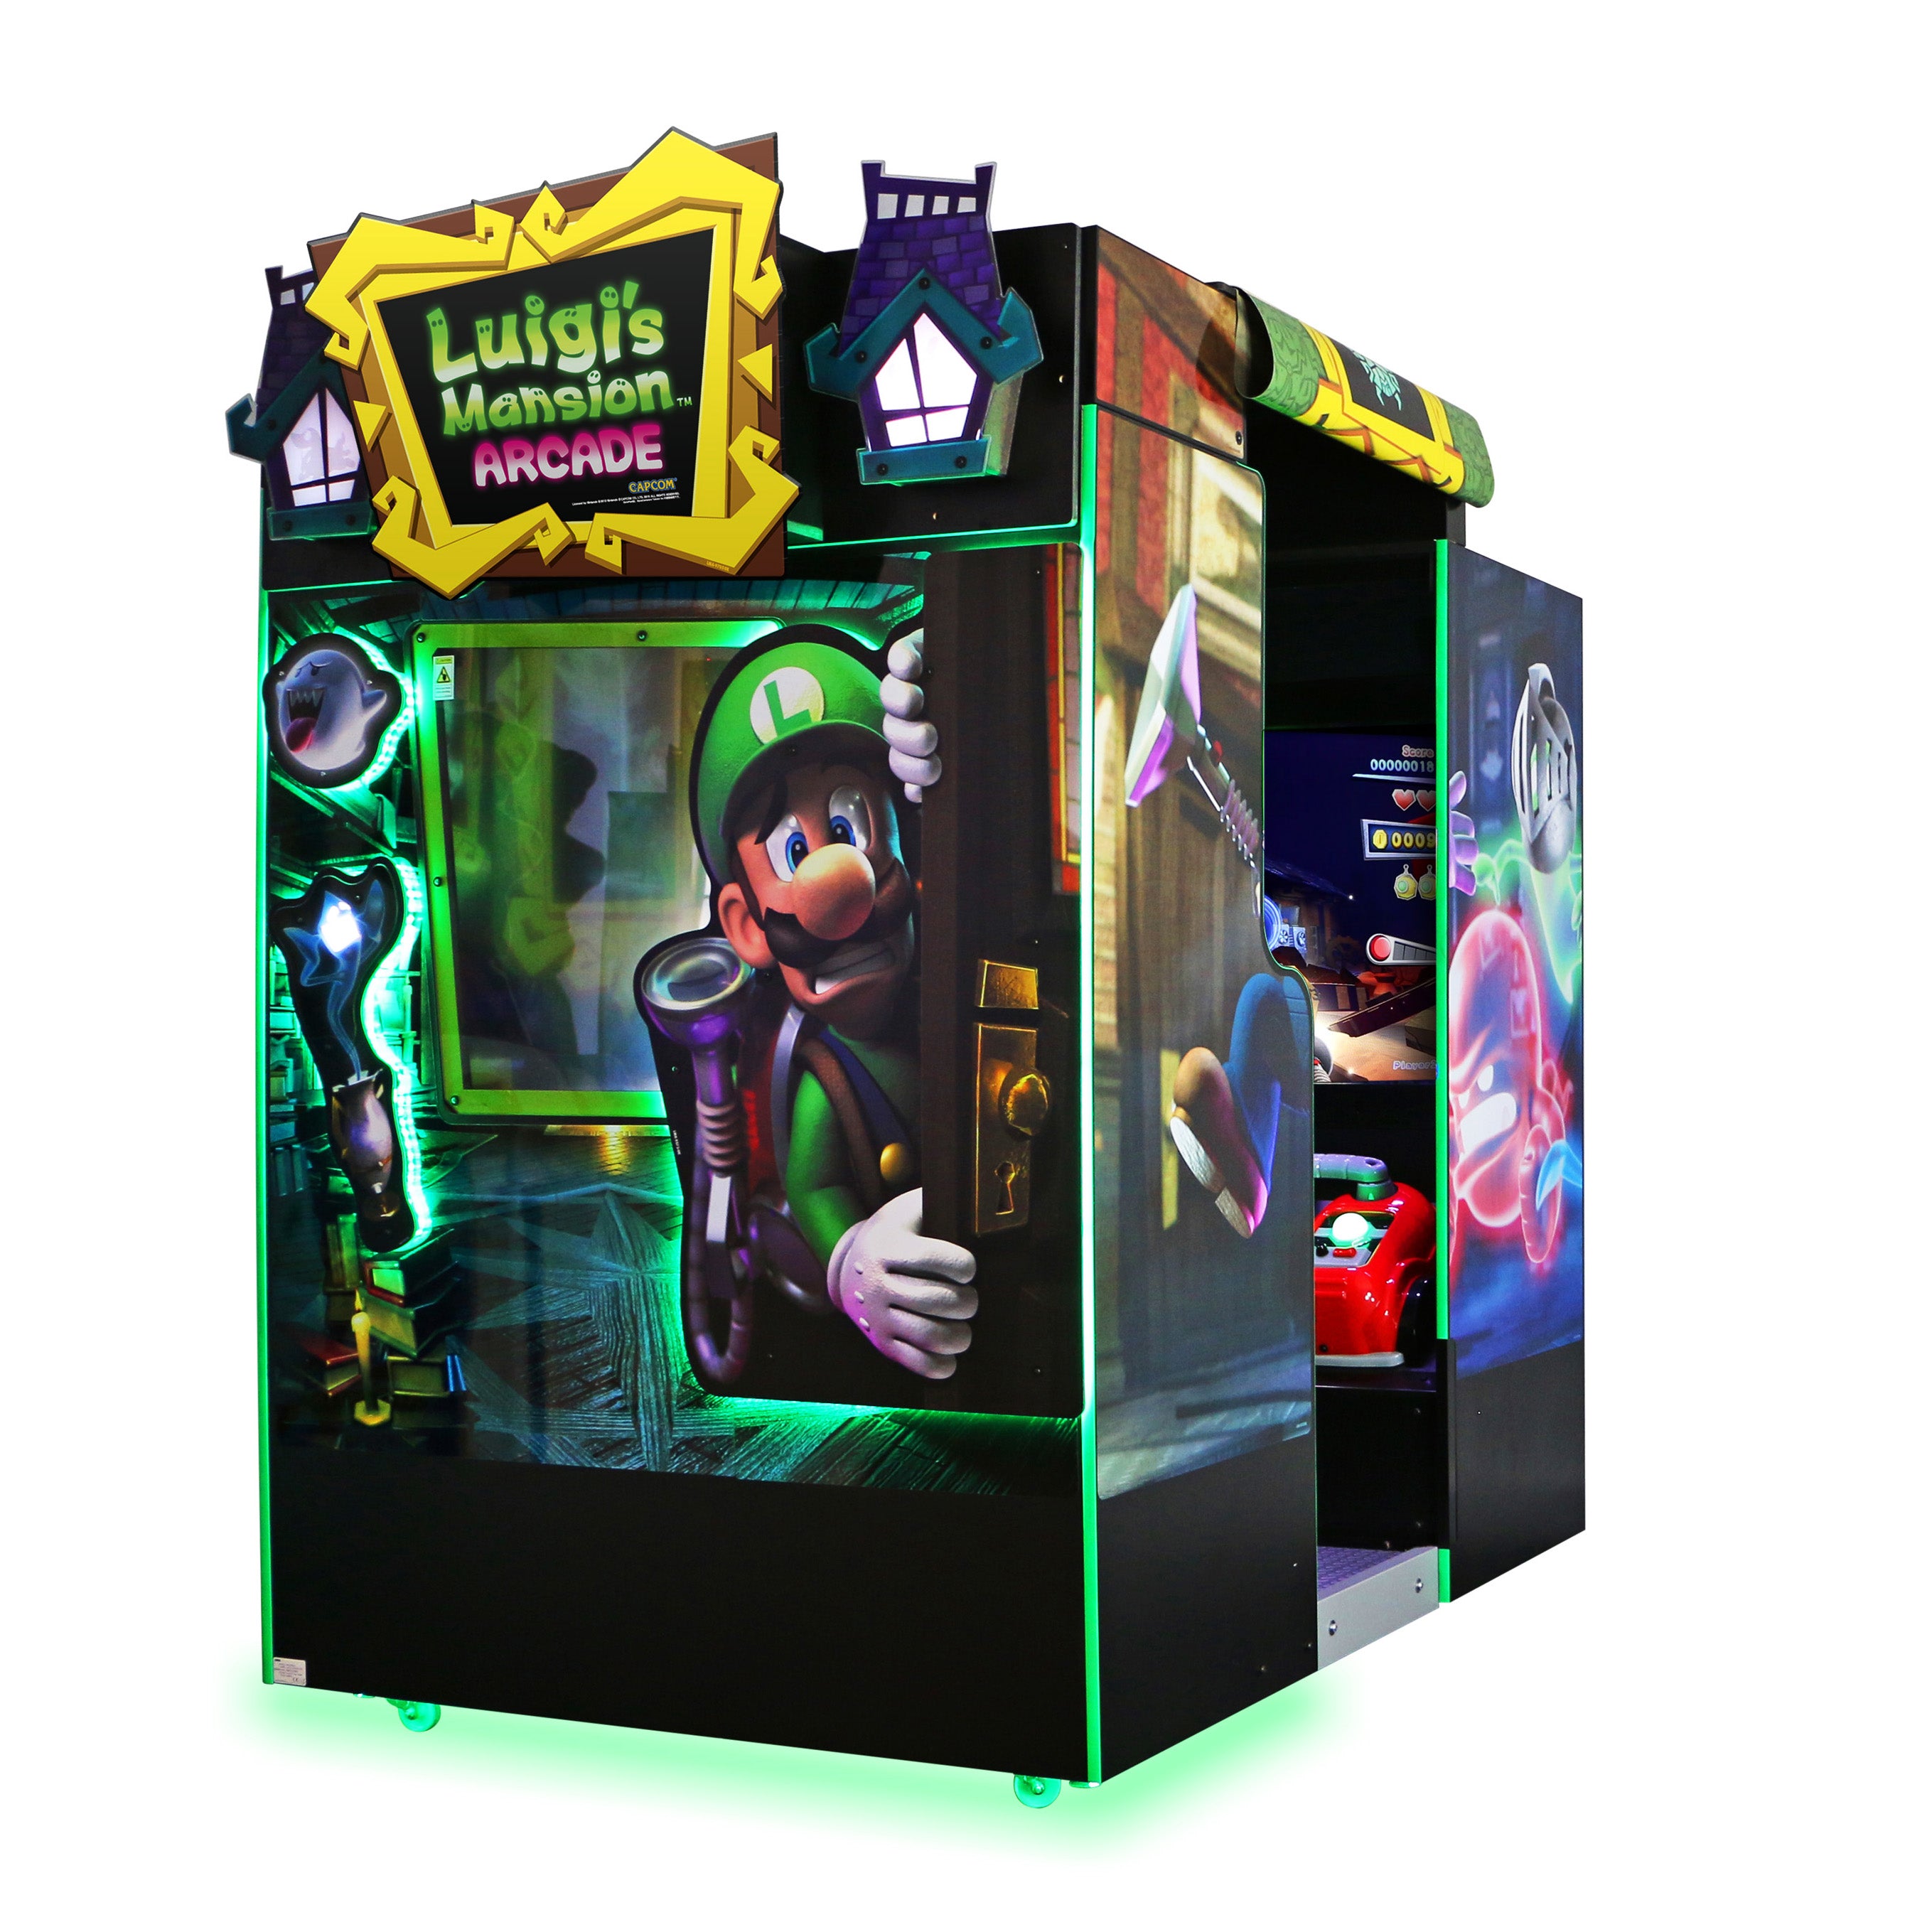 Are they ever gonna make a Luigi's Mansion 4 or what? What am I